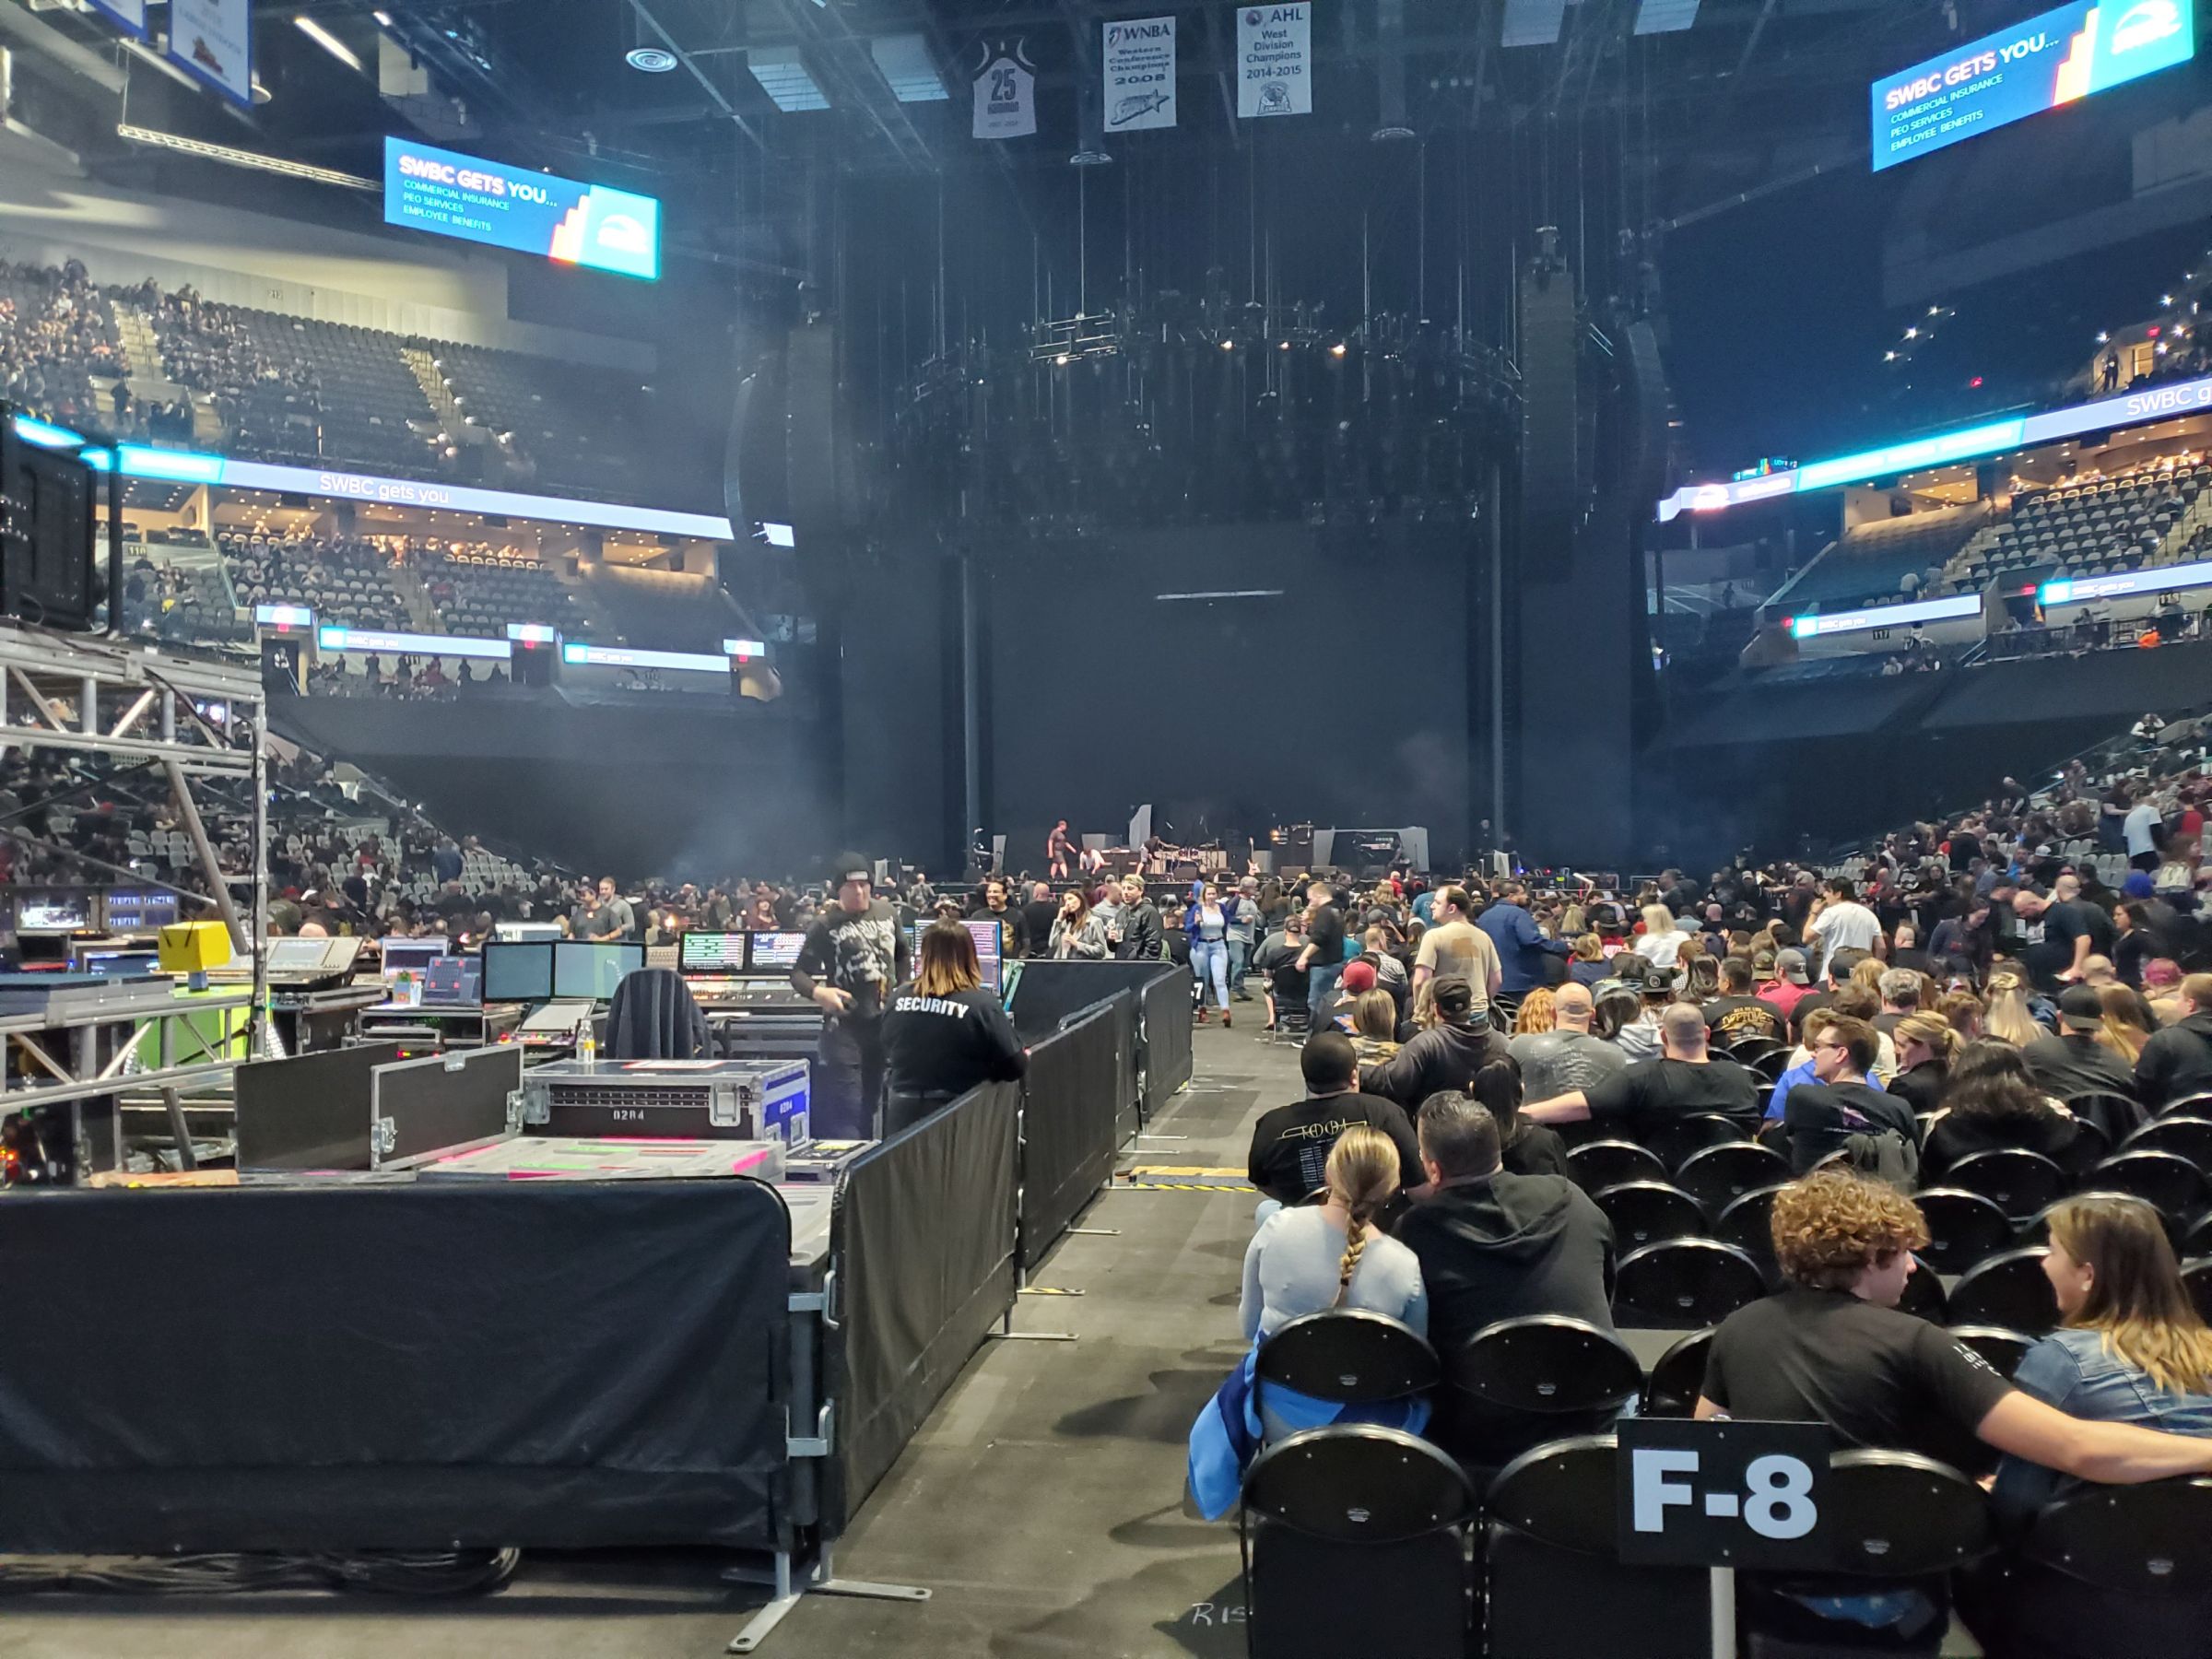 section 128, row 6 seat view  for concert - frost bank center